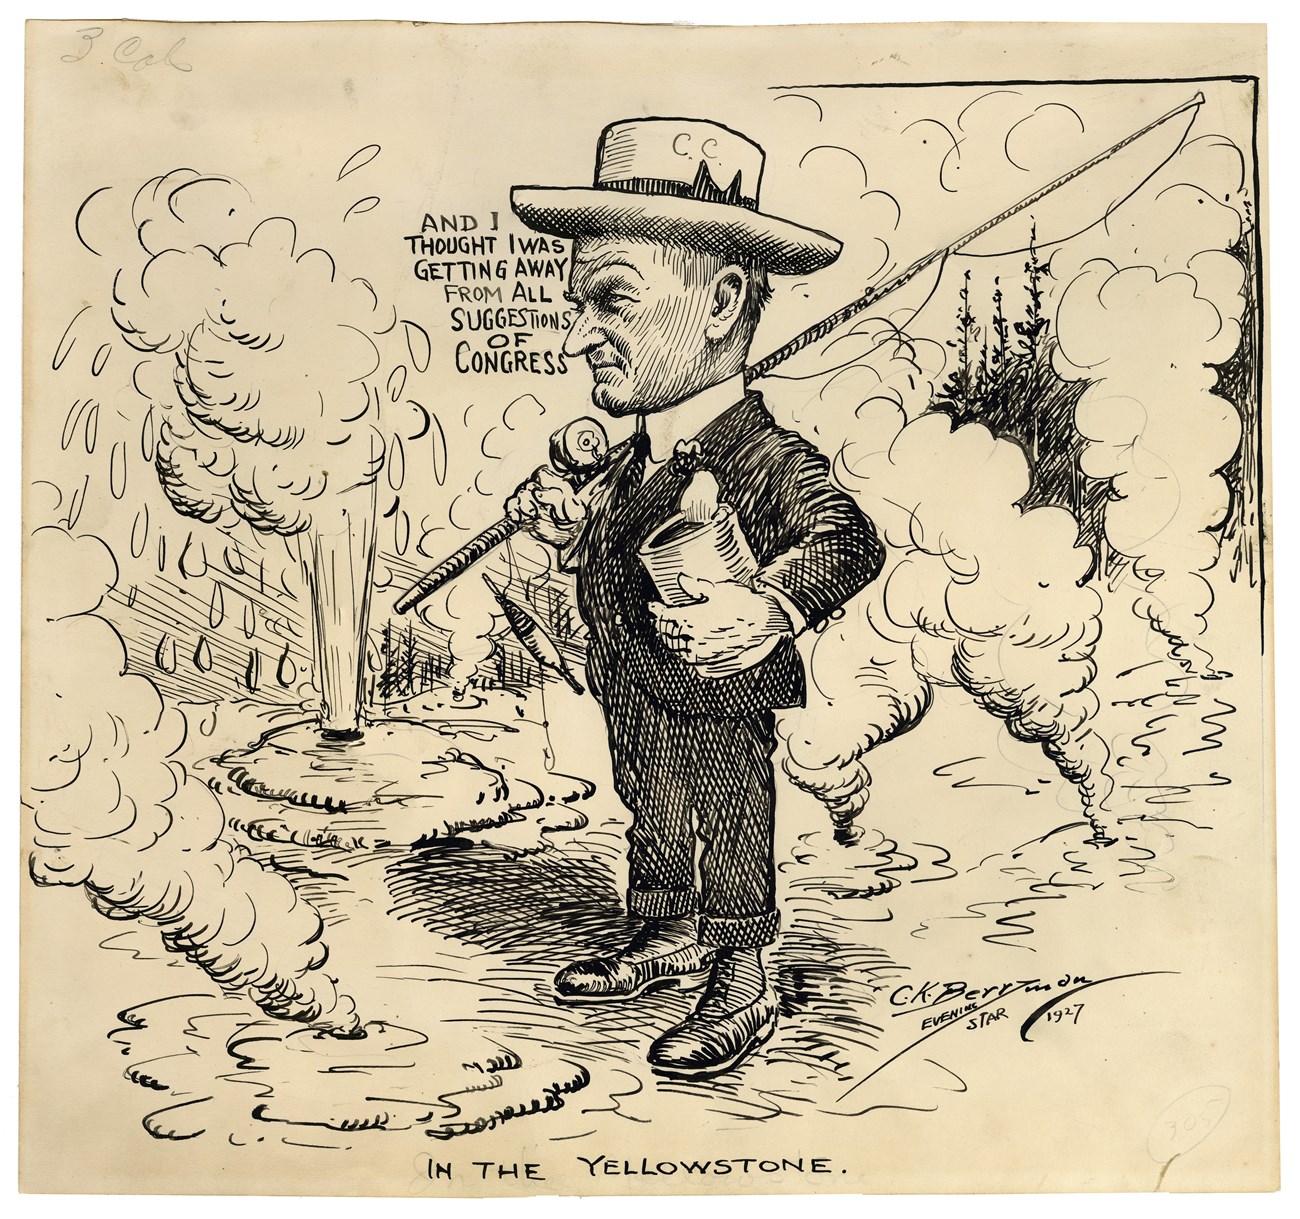 Cartoon of Calvin Coolidge holding a fishing pole and surrounded by spouting geysers.